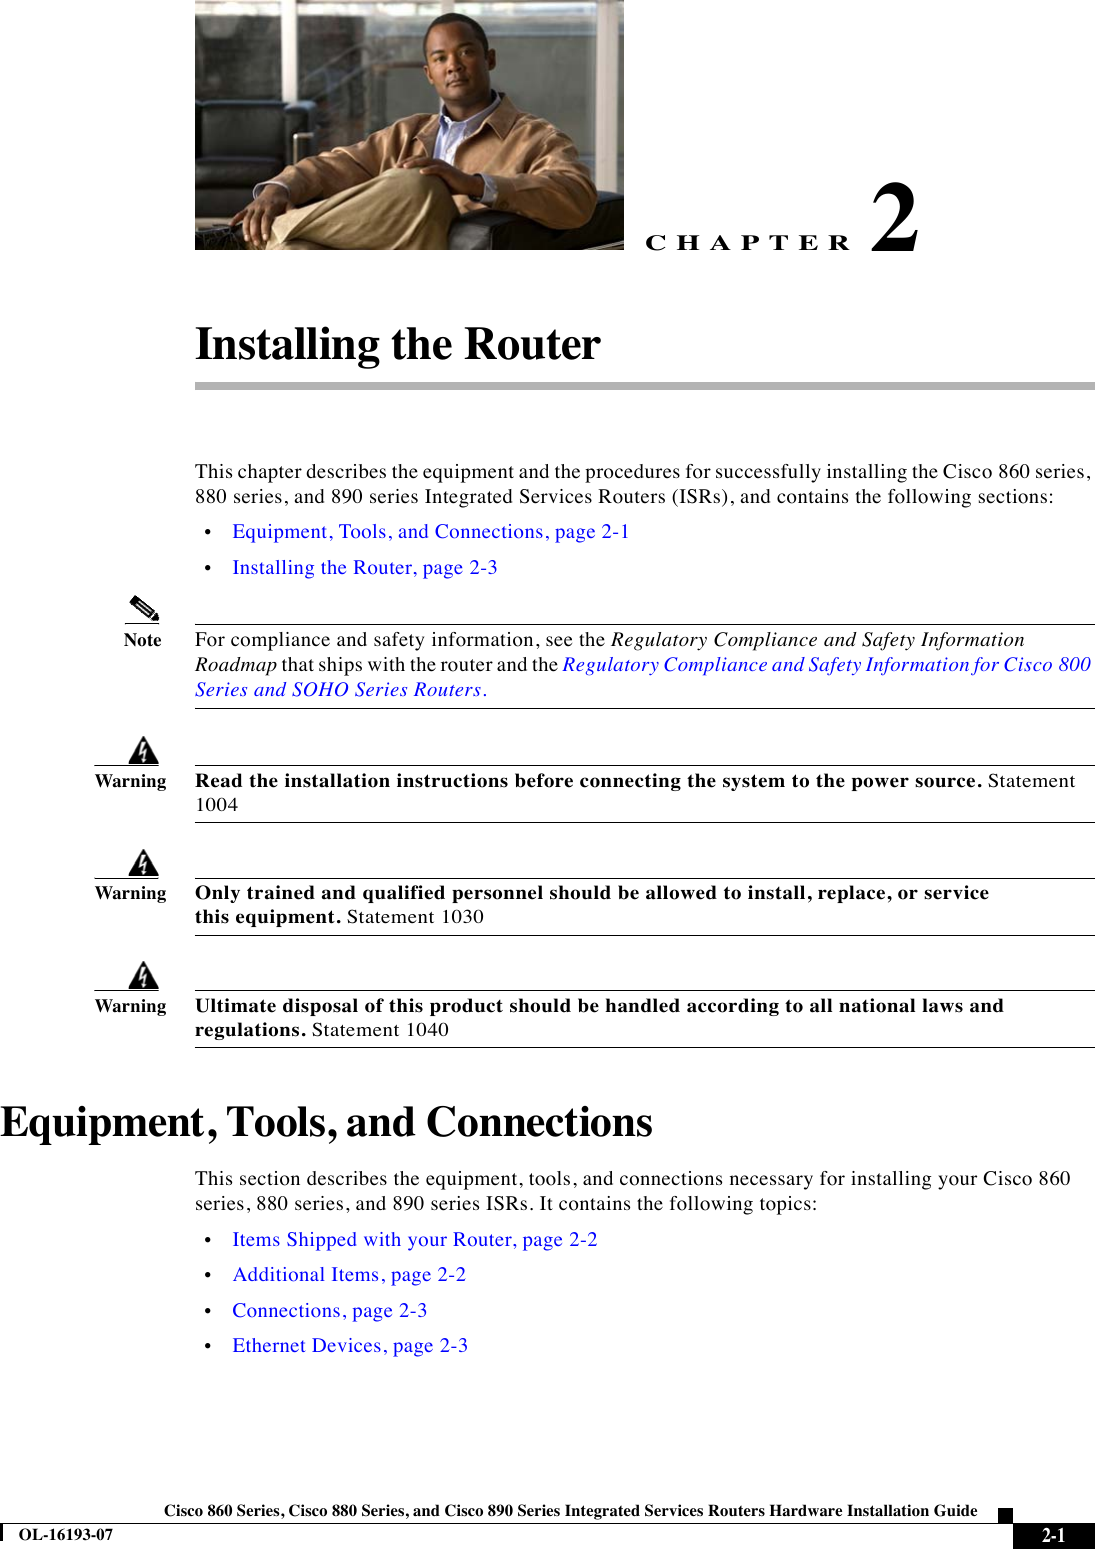 CHAPTER 2-1Cisco 860 Series, Cisco 880 Series, and Cisco 890 Series Integrated Services Routers Hardware Installation GuideOL-16193-072Installing the RouterThis chapter describes the equipment and the procedures for successfully installing the Cisco 860 series, 880 series, and 890 series Integrated Services Routers (ISRs), and contains the following sections:  •Equipment, Tools, and Connections, page 2-1  •Installing the Router, page 2-3NoteFor compliance and safety information, see the Regulatory Compliance and Safety Information Roadmap that ships with the router and the Regulatory Compliance and Safety Information for Cisco 800 Series and SOHO Series Routers.WarningRead the installation instructions before connecting the system to the power source. Statement 1004WarningOnly trained and qualified personnel should be allowed to install, replace, or service this equipment. Statement 1030WarningUltimate disposal of this product should be handled according to all national laws and regulations. Statement 1040Equipment, Tools, and ConnectionsThis section describes the equipment, tools, and connections necessary for installing your Cisco 860 series, 880 series, and 890 series ISRs. It contains the following topics:  •Items Shipped with your Router, page 2-2  •Additional Items, page 2-2  •Connections, page 2-3  •Ethernet Devices, page 2-3